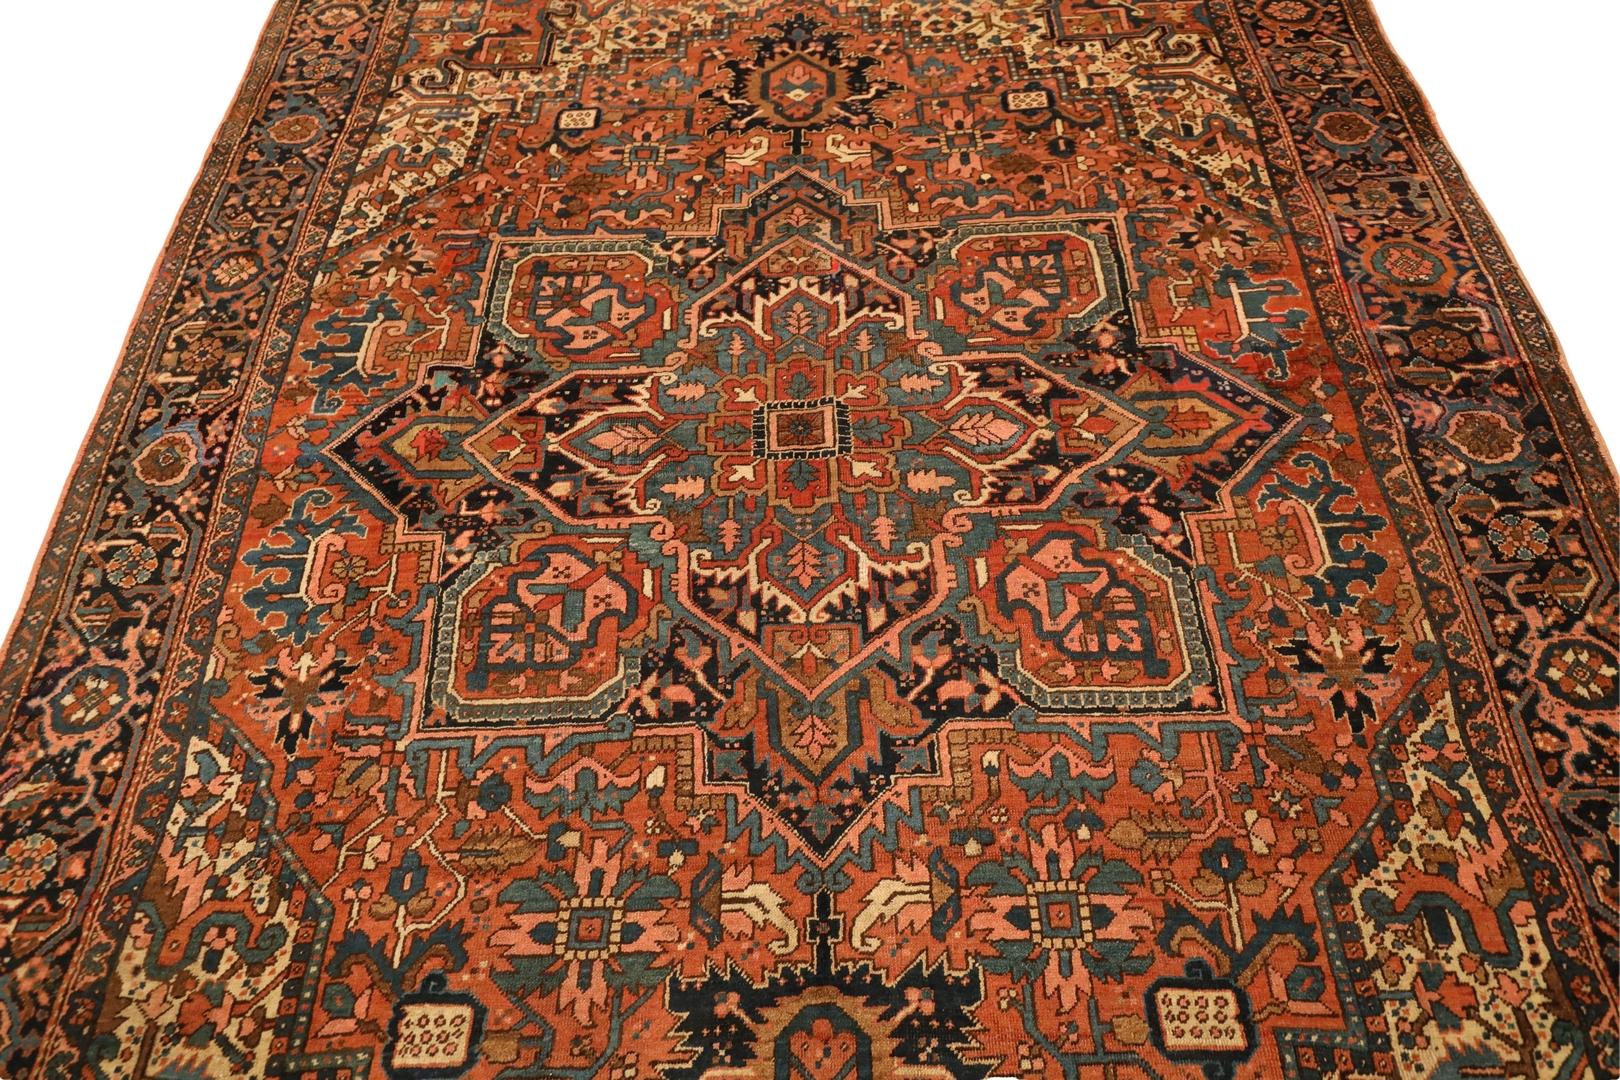 Hand-Knotted Heriz Antique Rug - 8'4